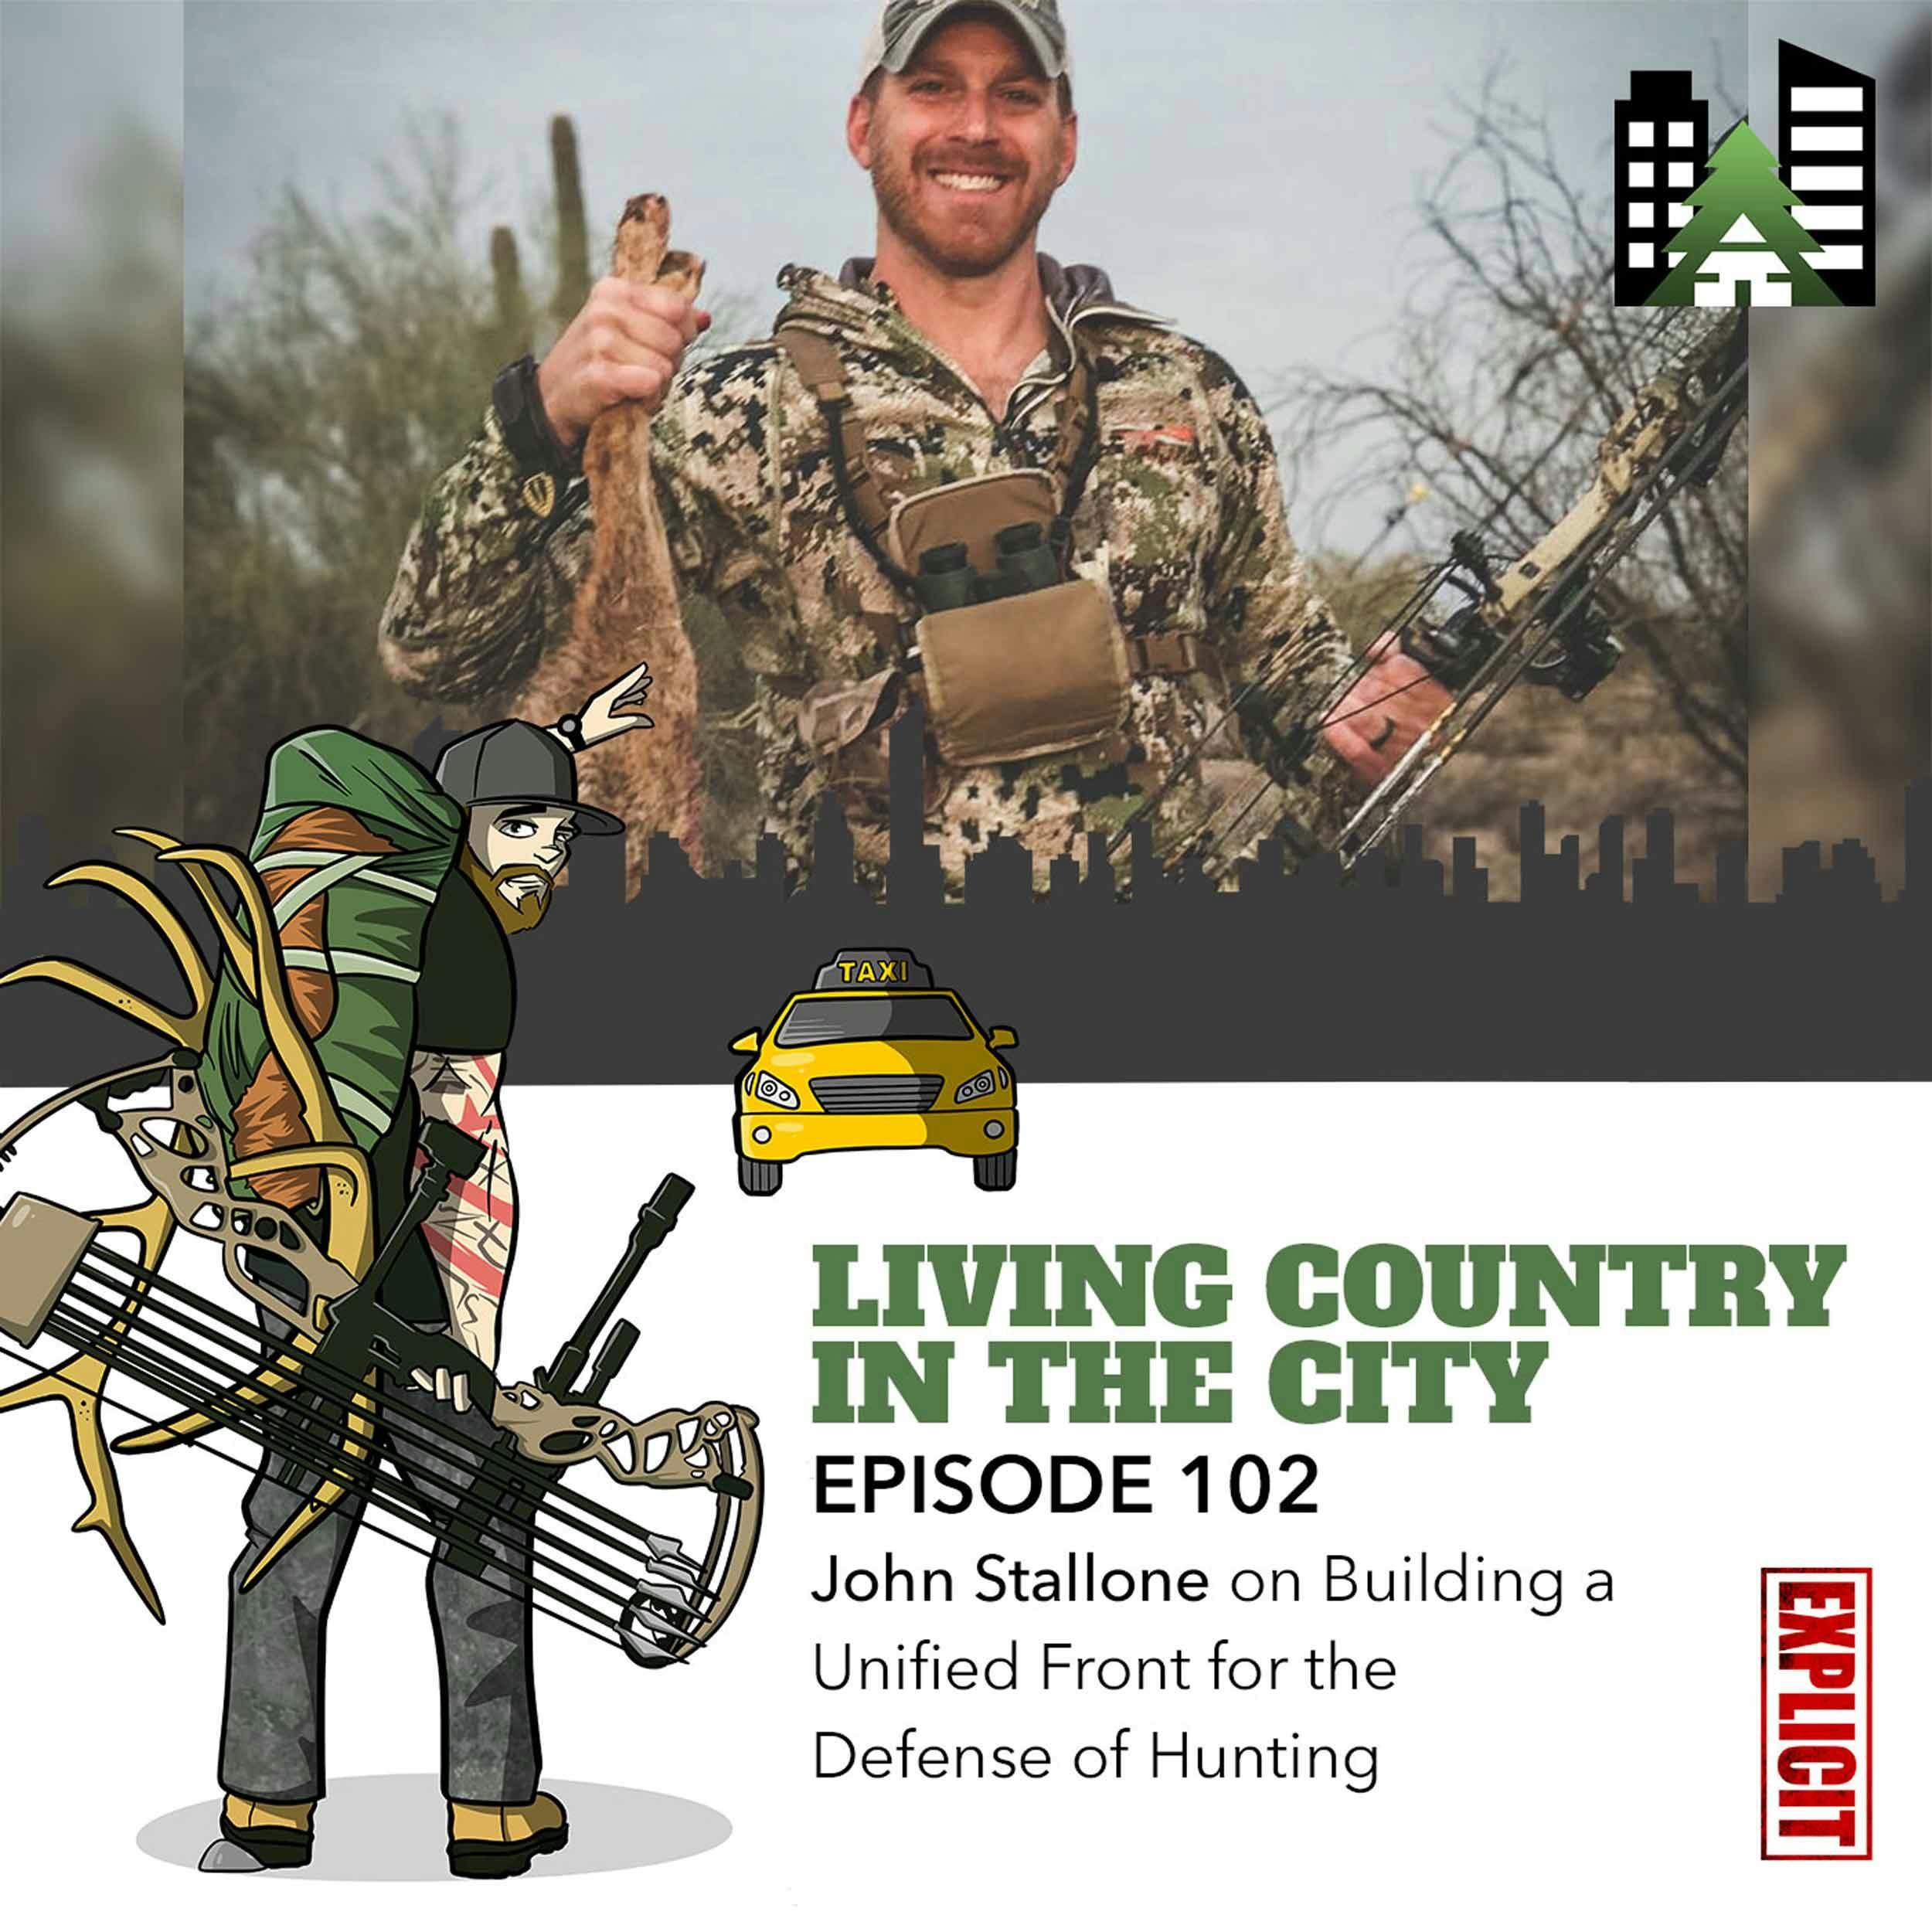 Ep 102 - John Stallone on Building a Unified Front for the Defense of Hunting